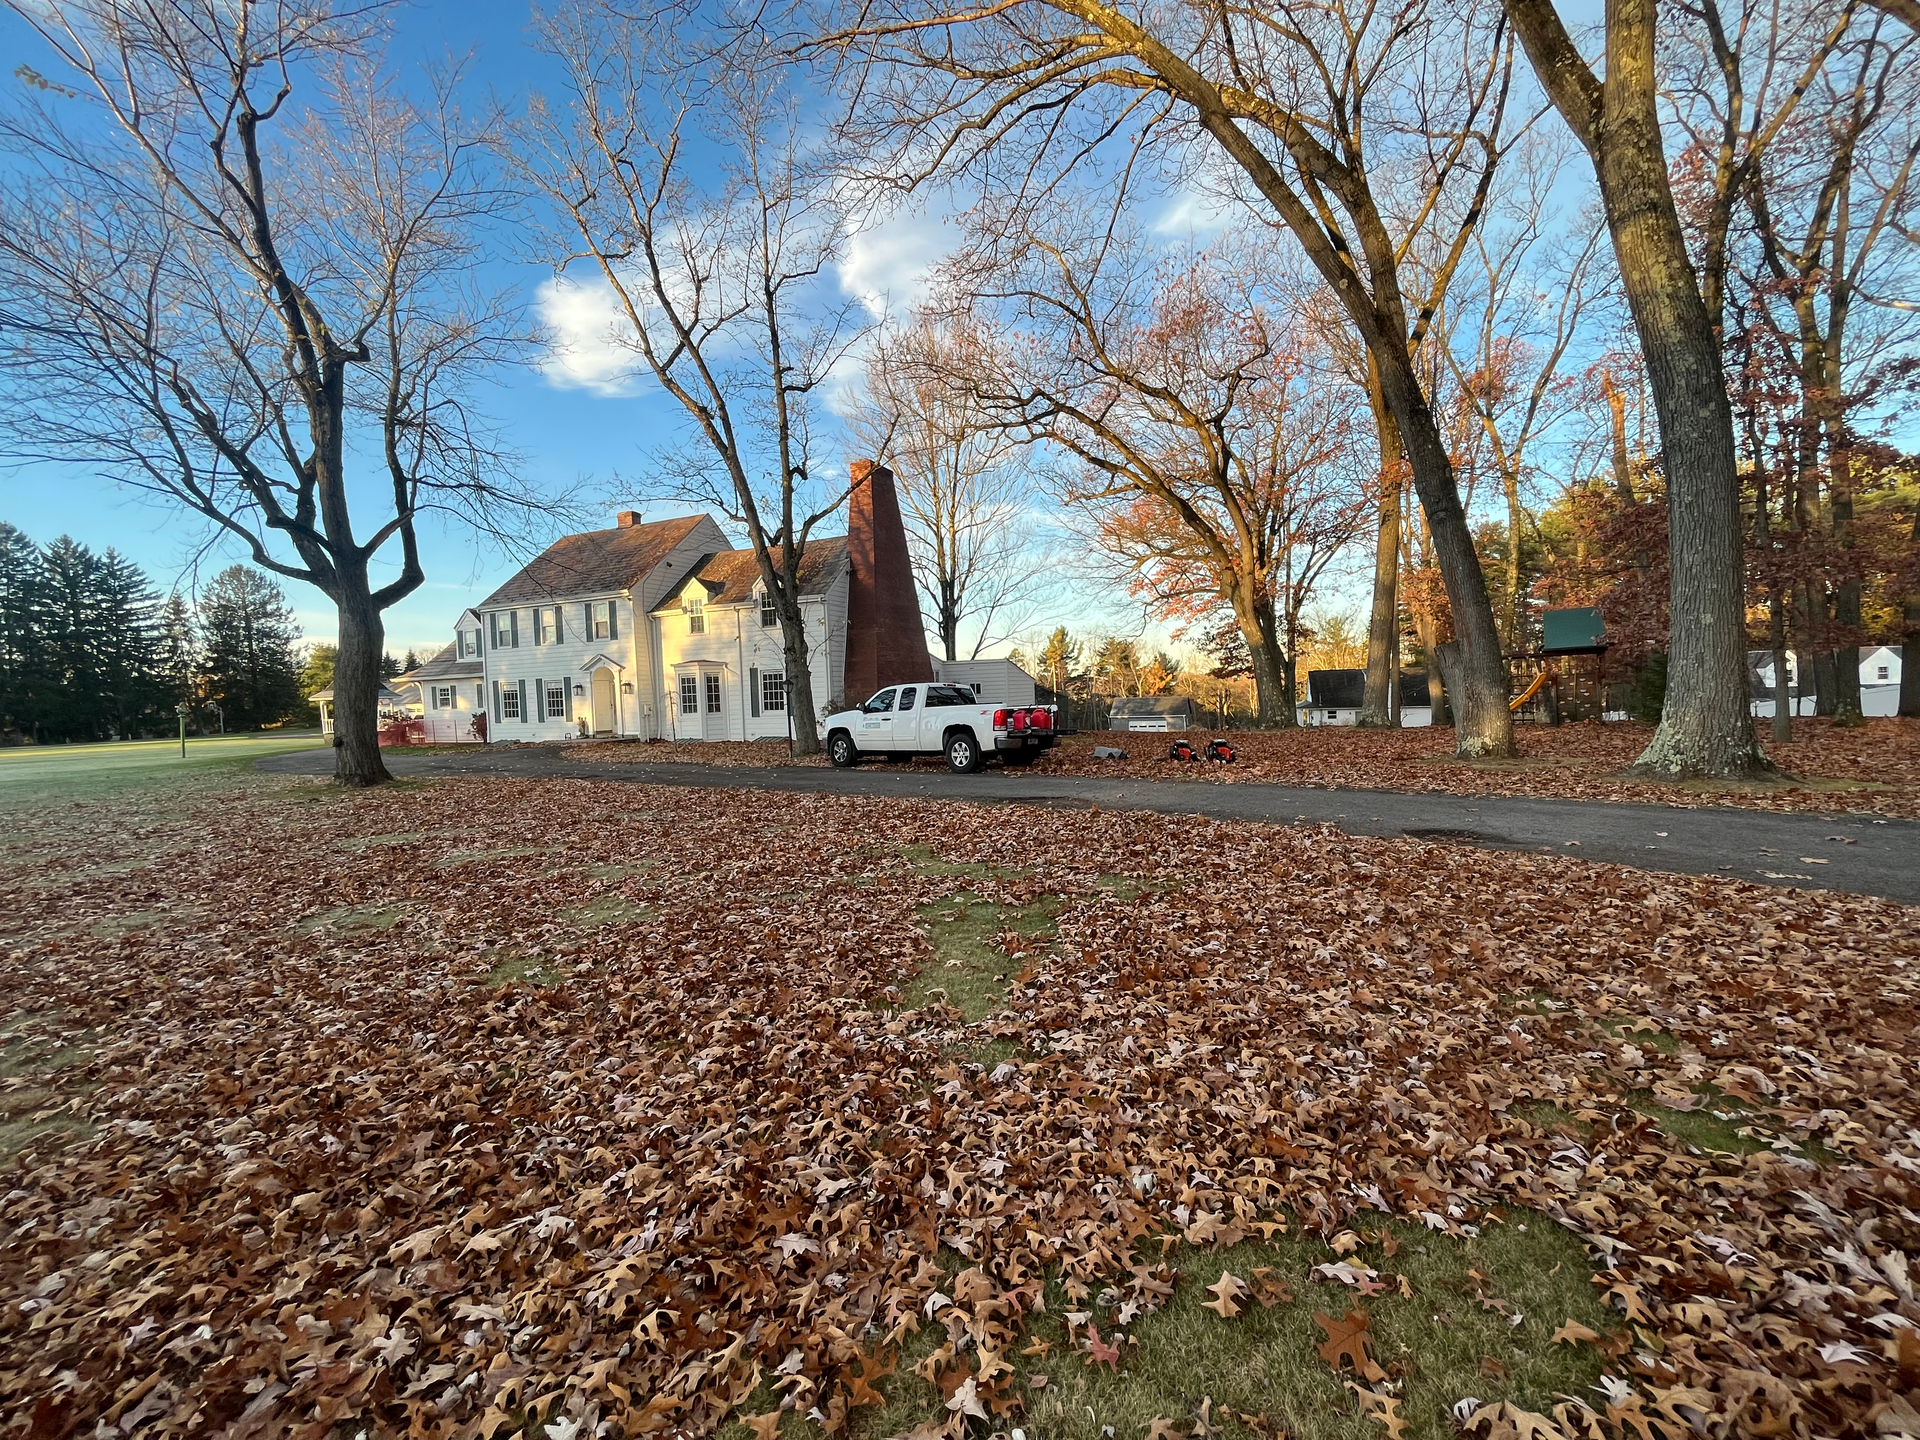 a white truck is parked in front of a house surrounded by leaves .